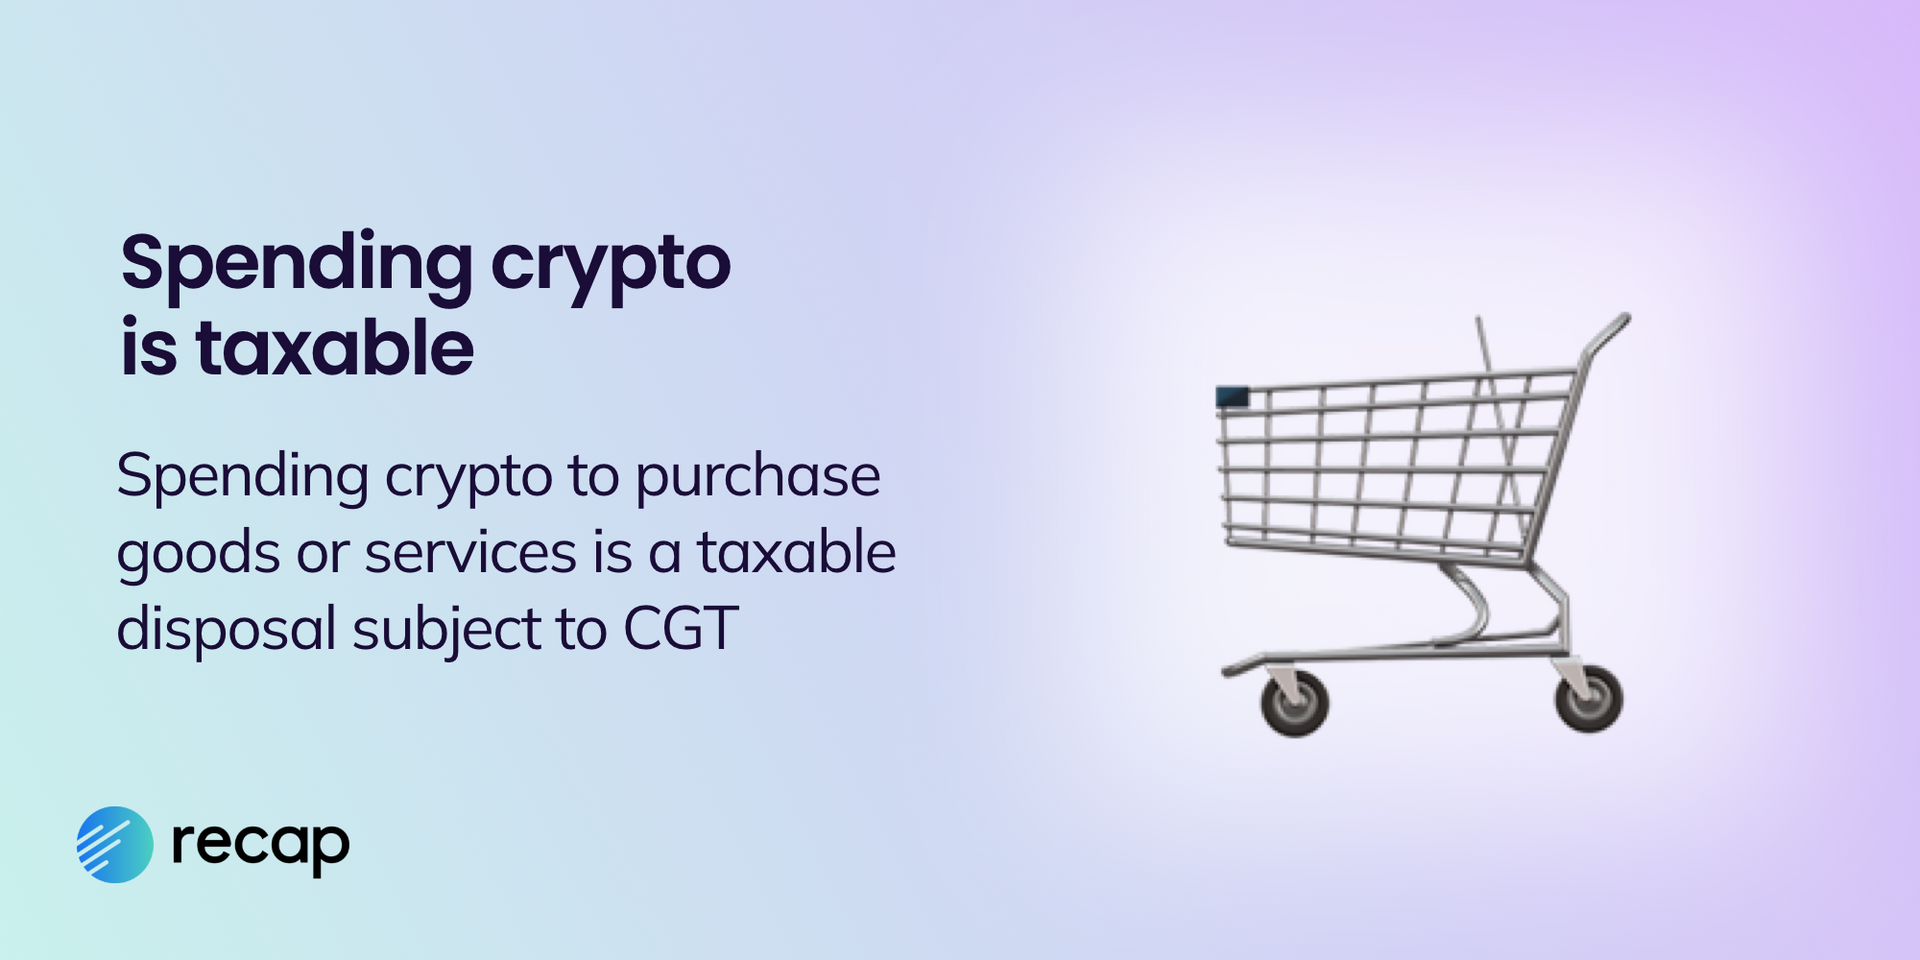 An infographic stating that spending crypto to purchase goods or services is a taxable disposal subject to CGT